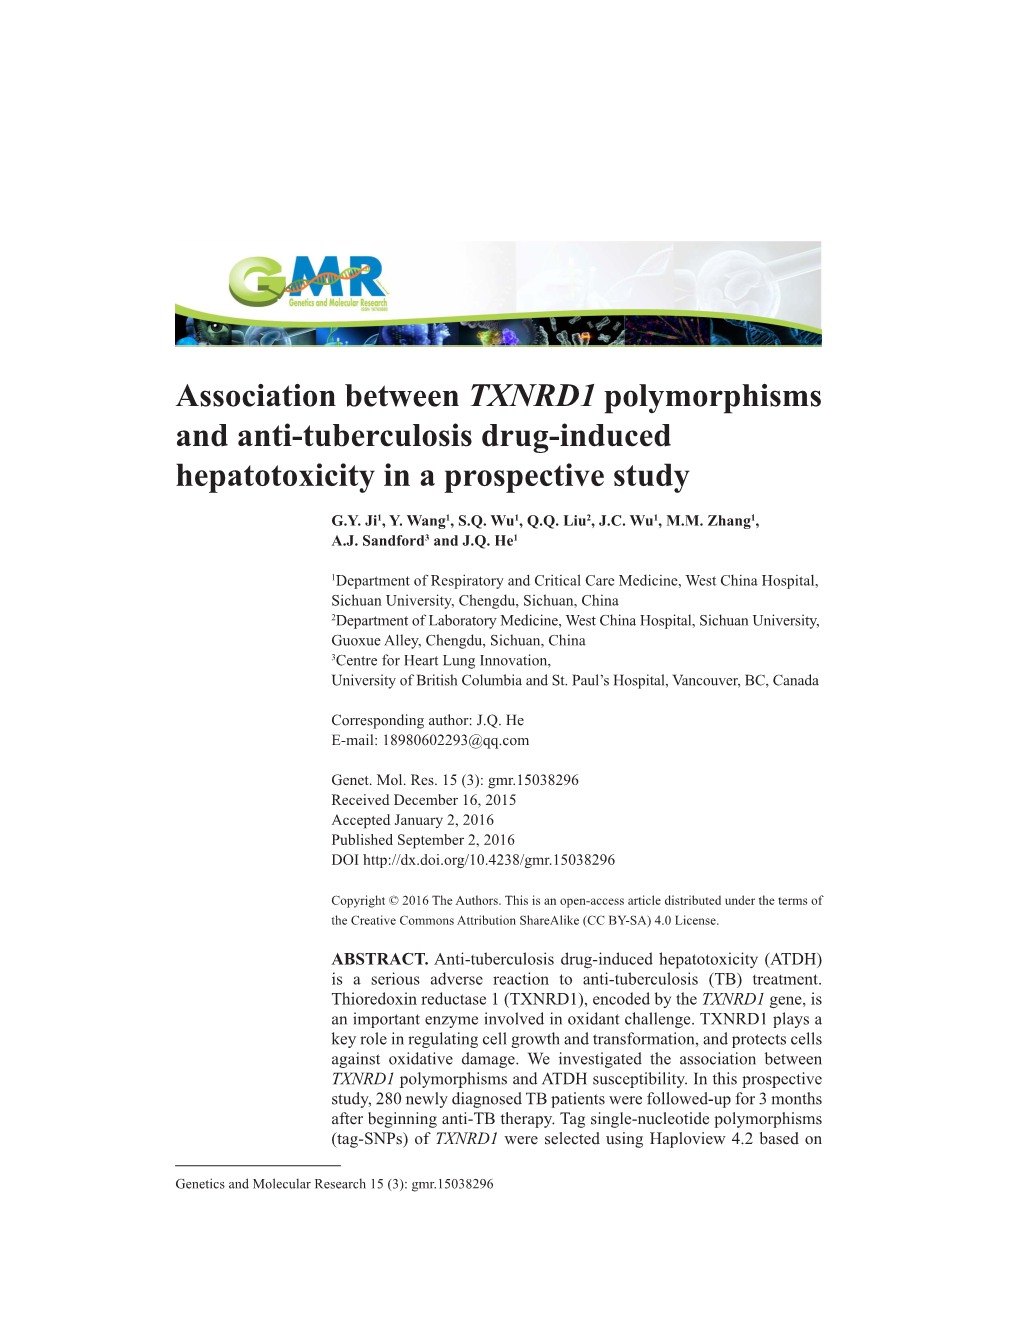 Association Between TXNRD1 Polymorphisms and Anti-Tuberculosis Drug-Induced Hepatotoxicity in a Prospective Study